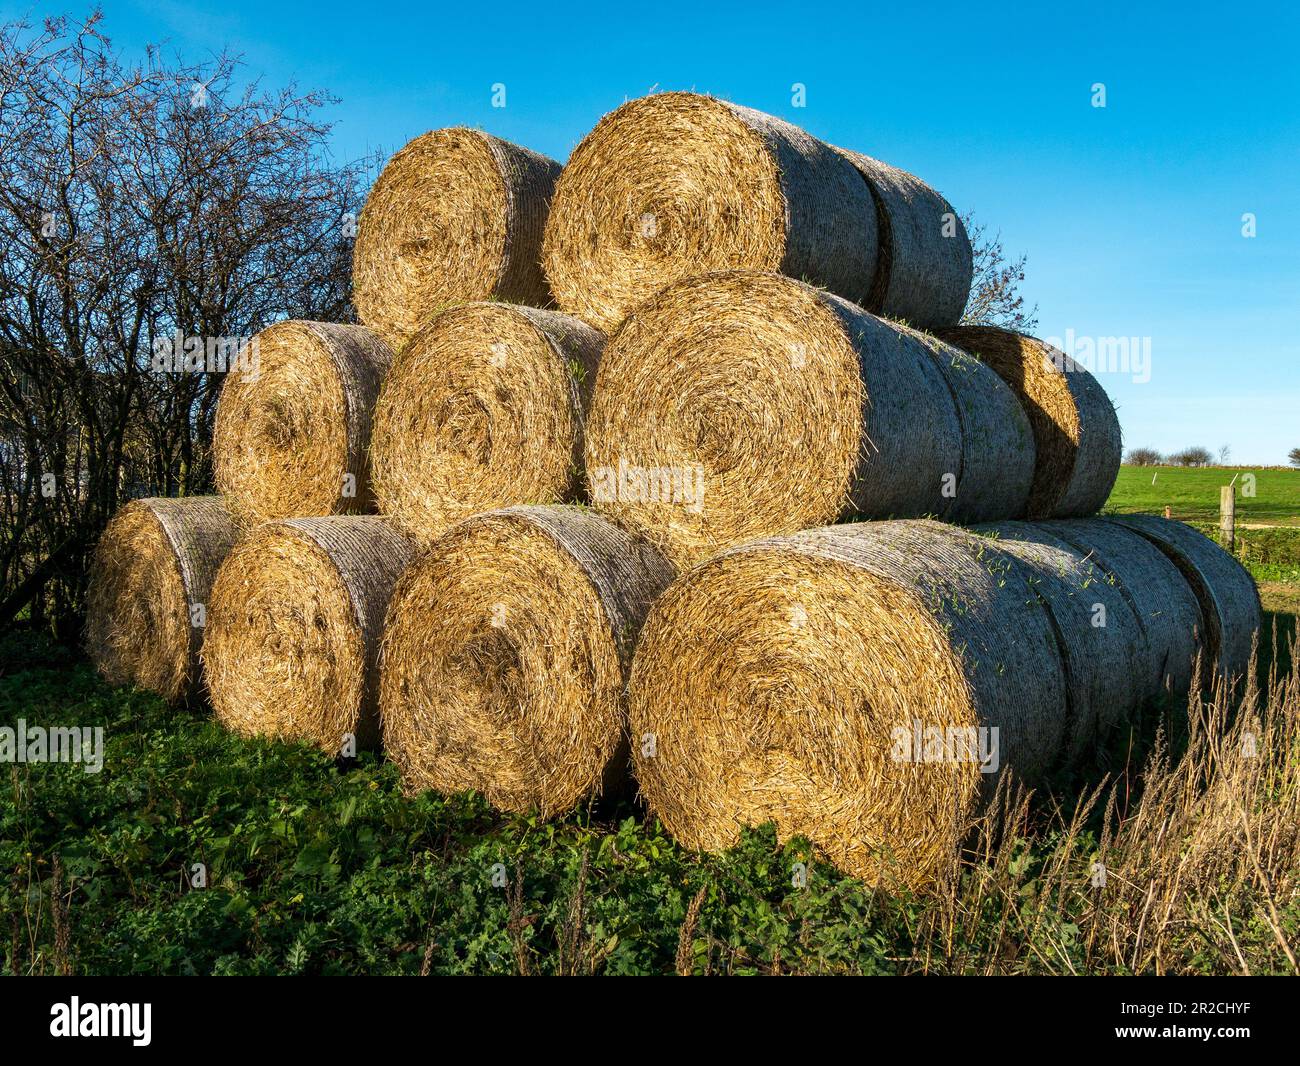 Neat pyramid Hay stack made from a stack of large round straw bales on a Leicestershire farm, England, UK Stock Photo